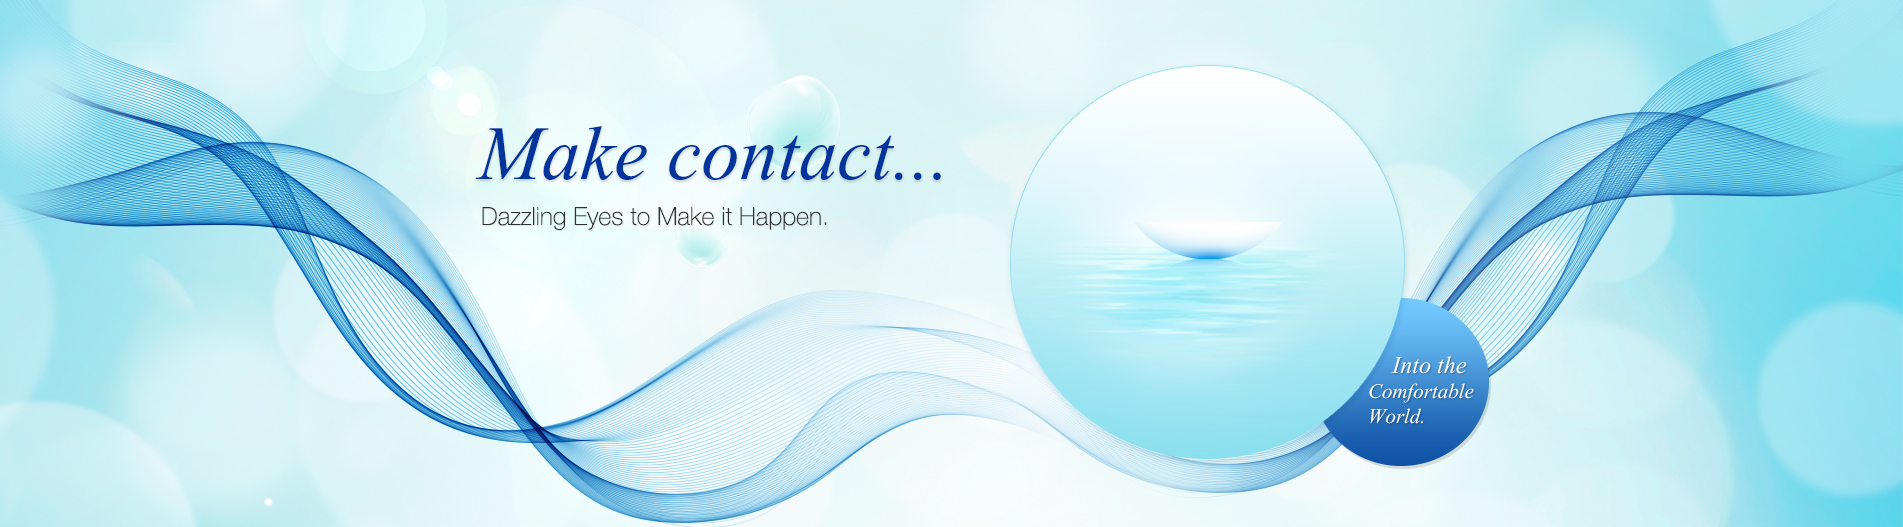 Make Contact... Dazzling Eyes to Make it Happen.